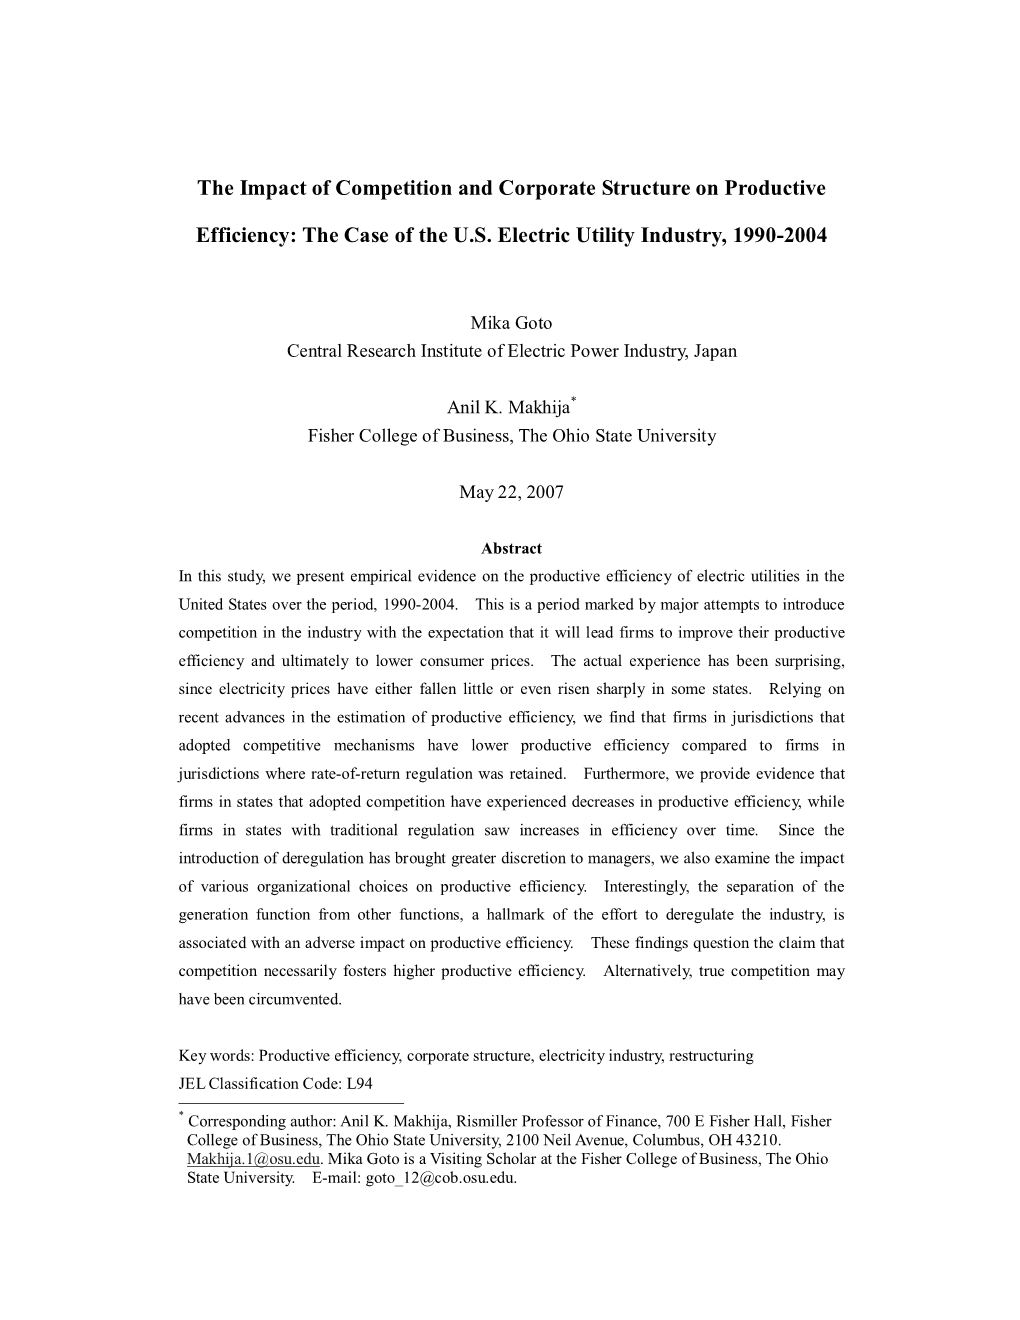 The Impact of Competition and Corporate Structure on Productive Efficiency